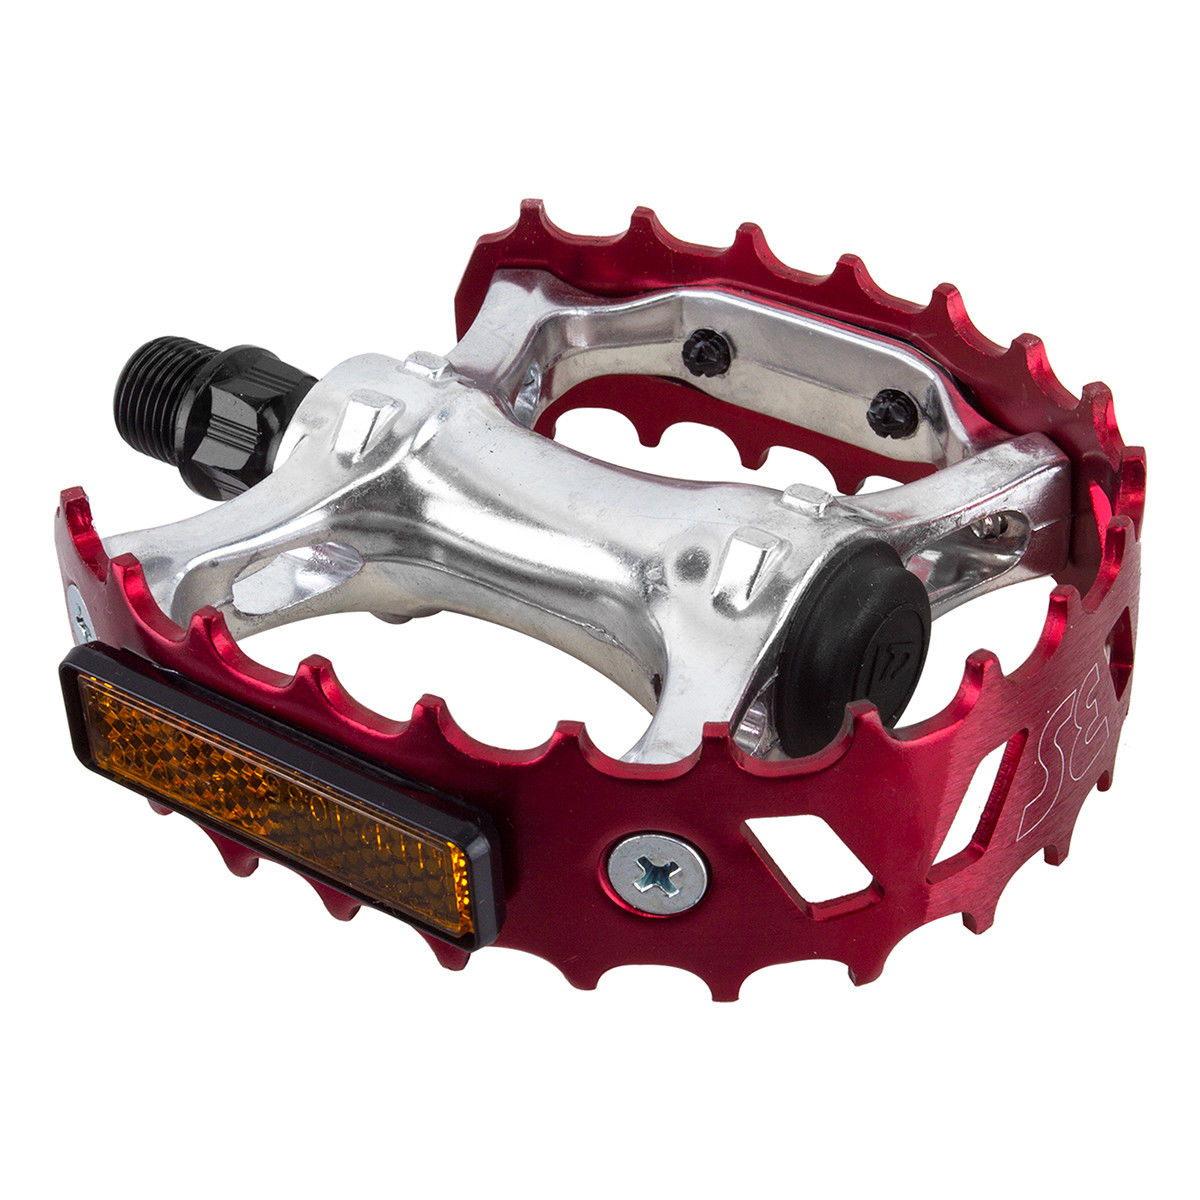 SE Racing Bear Trap Aluminum Cage Pedals - 9/16" - Red